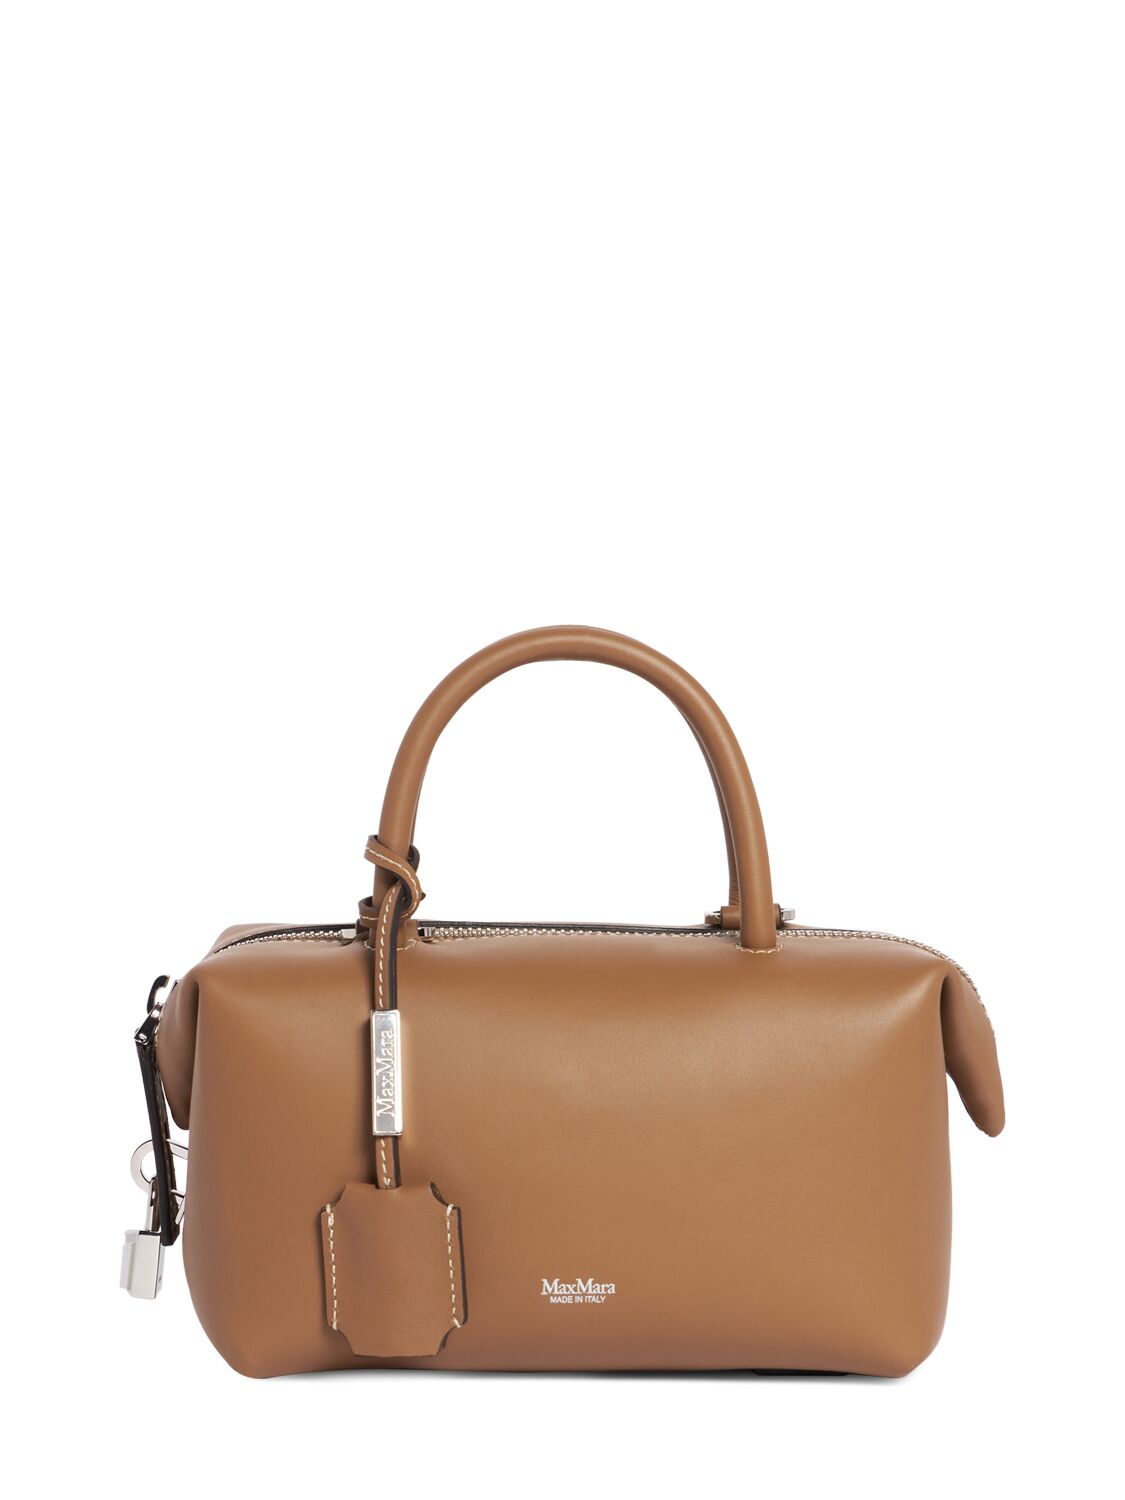 Max Mara Small Holdall Leather Top Handle Bag In Coloniale